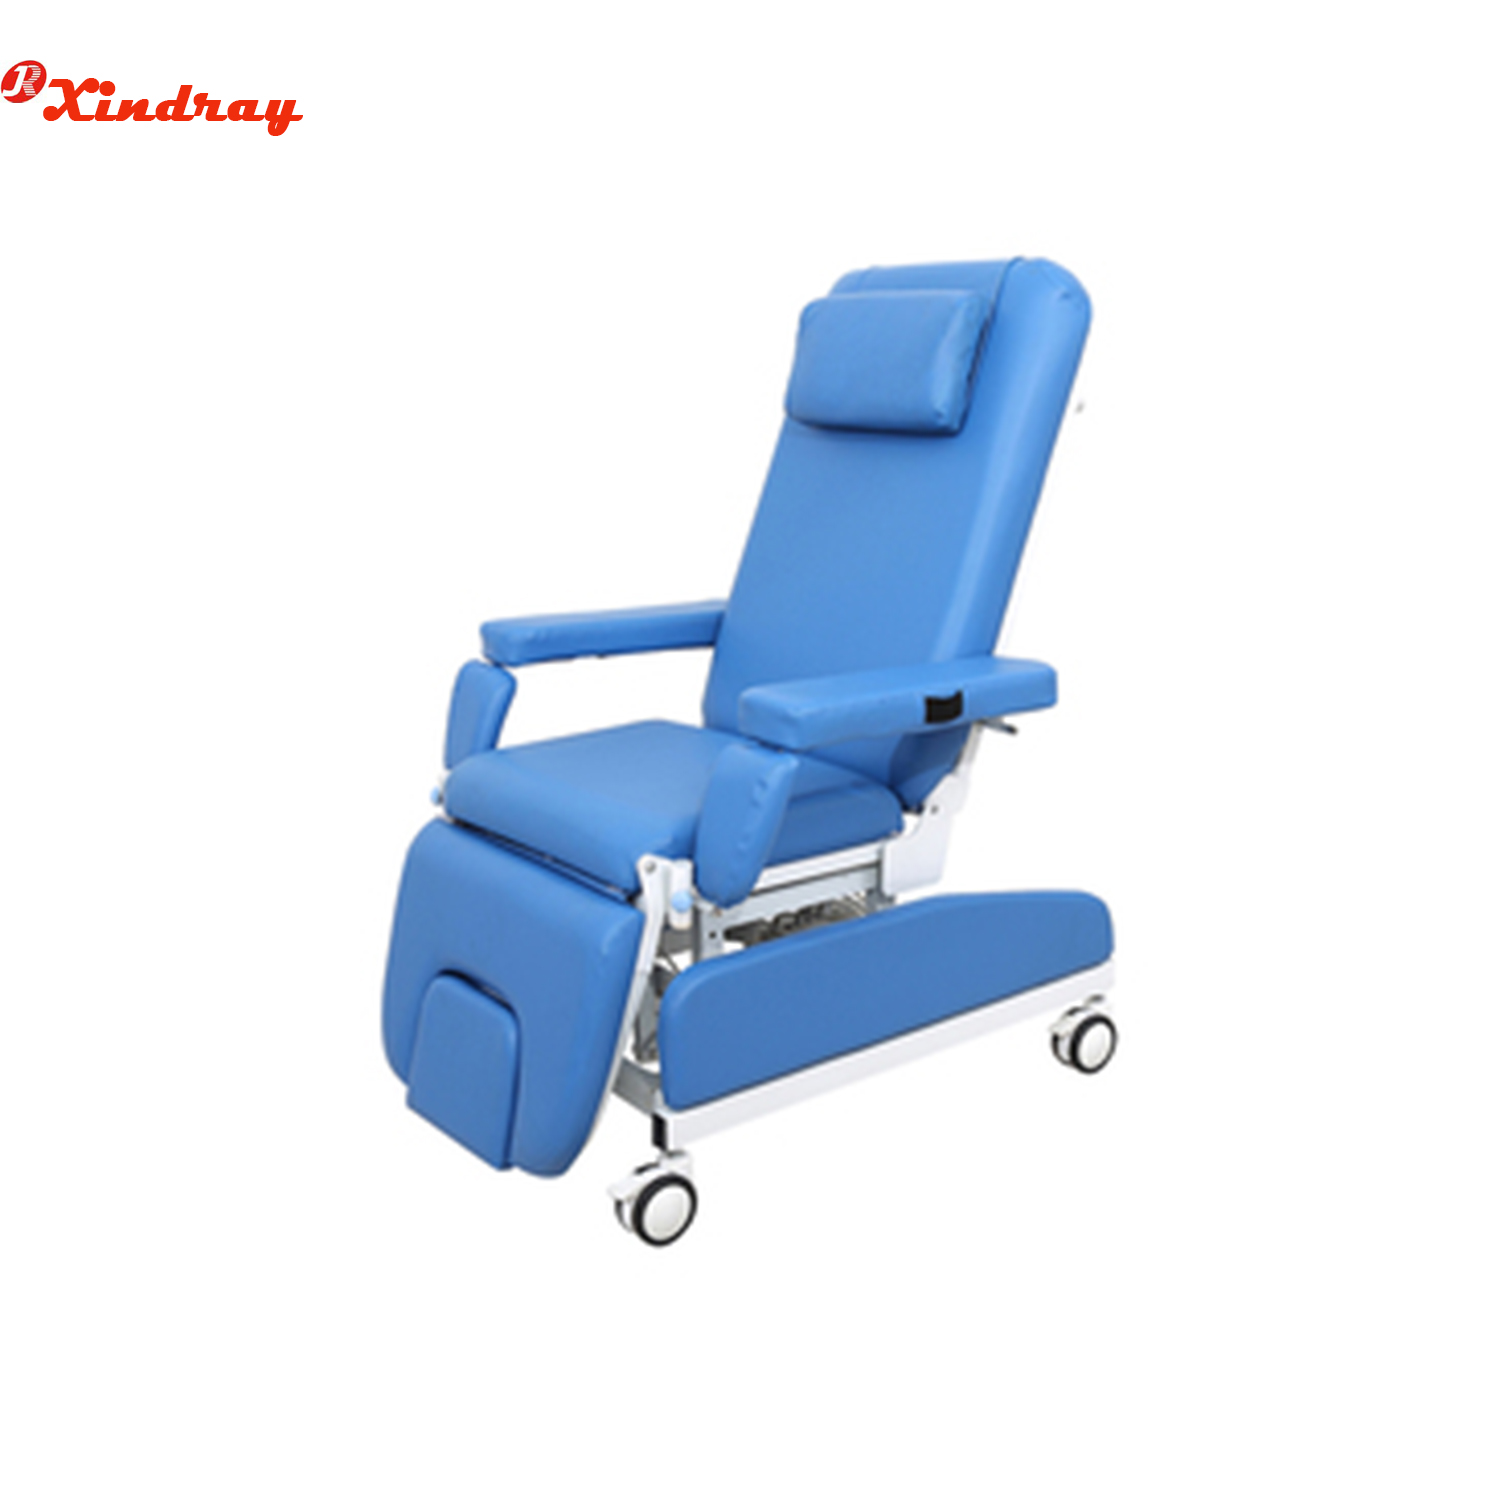 Luxury Electric Blood Donation Chair